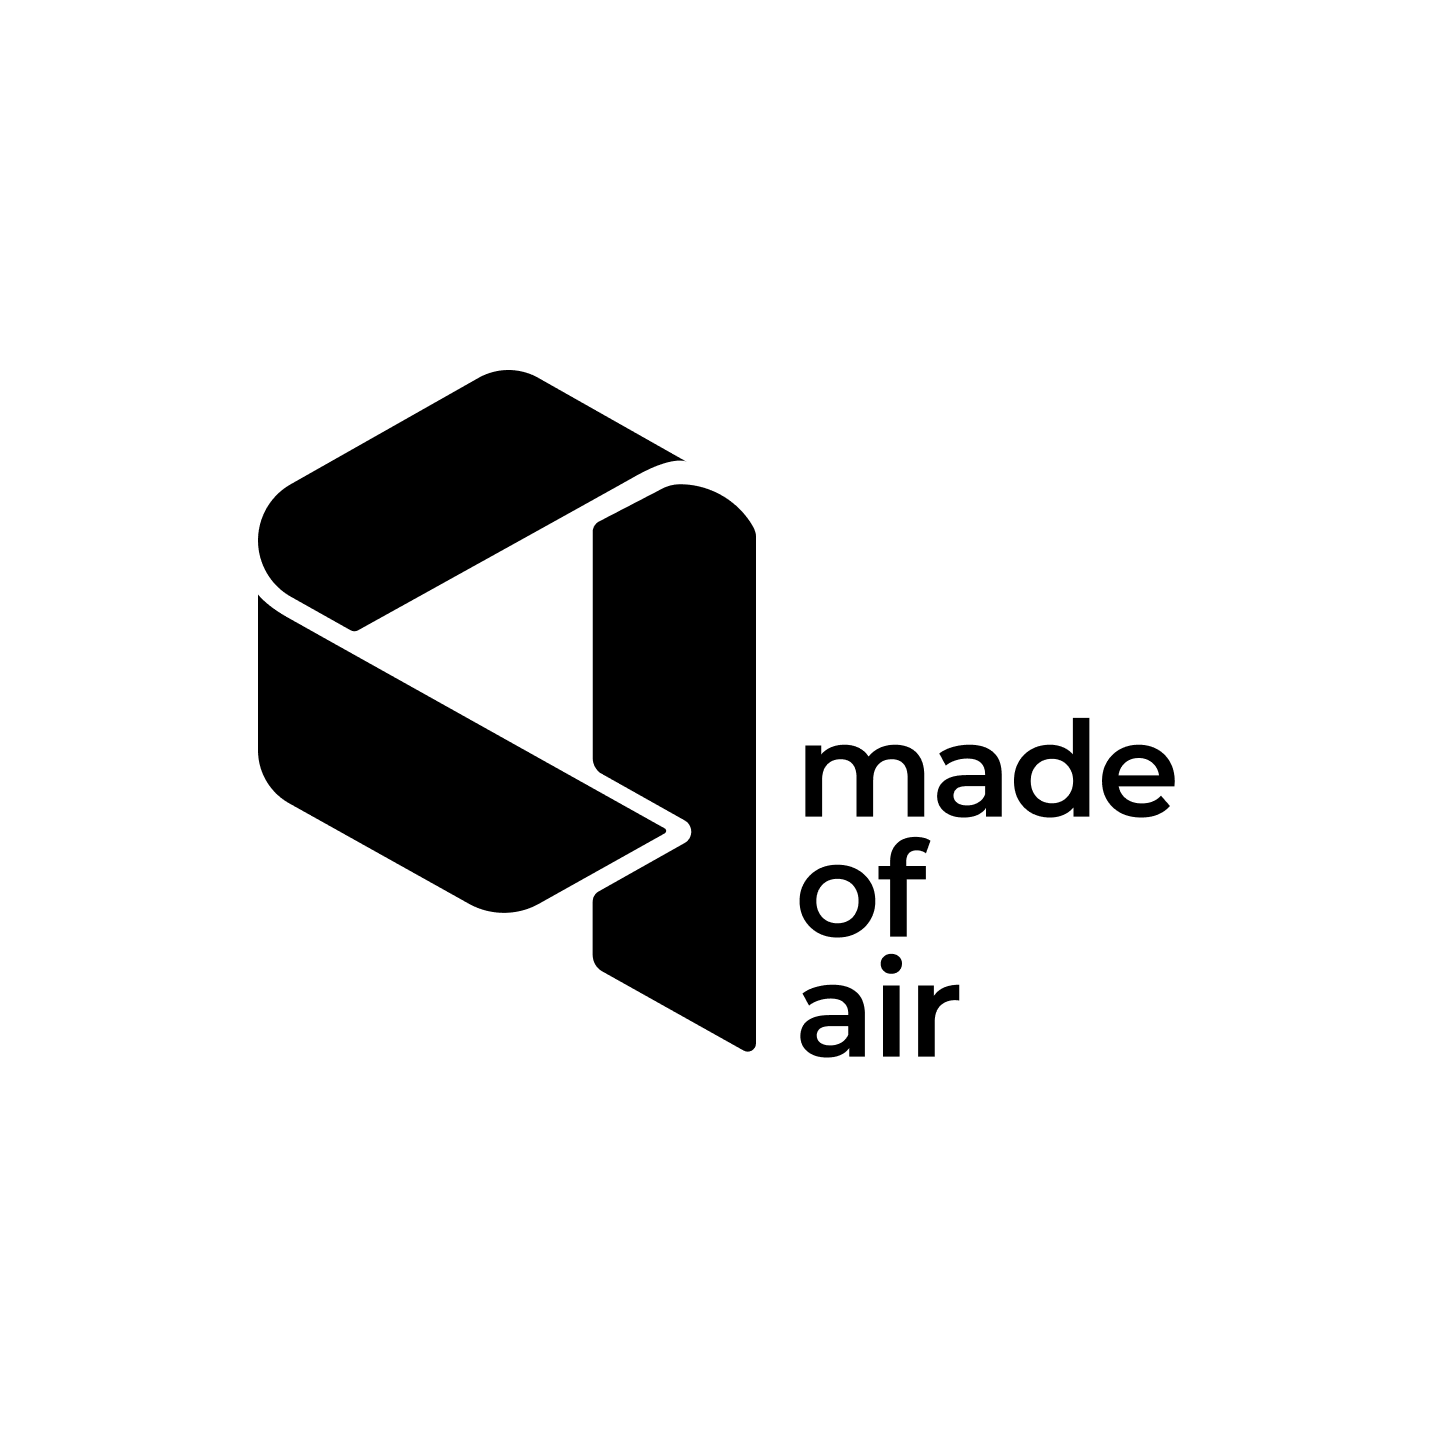 Made of air old identity